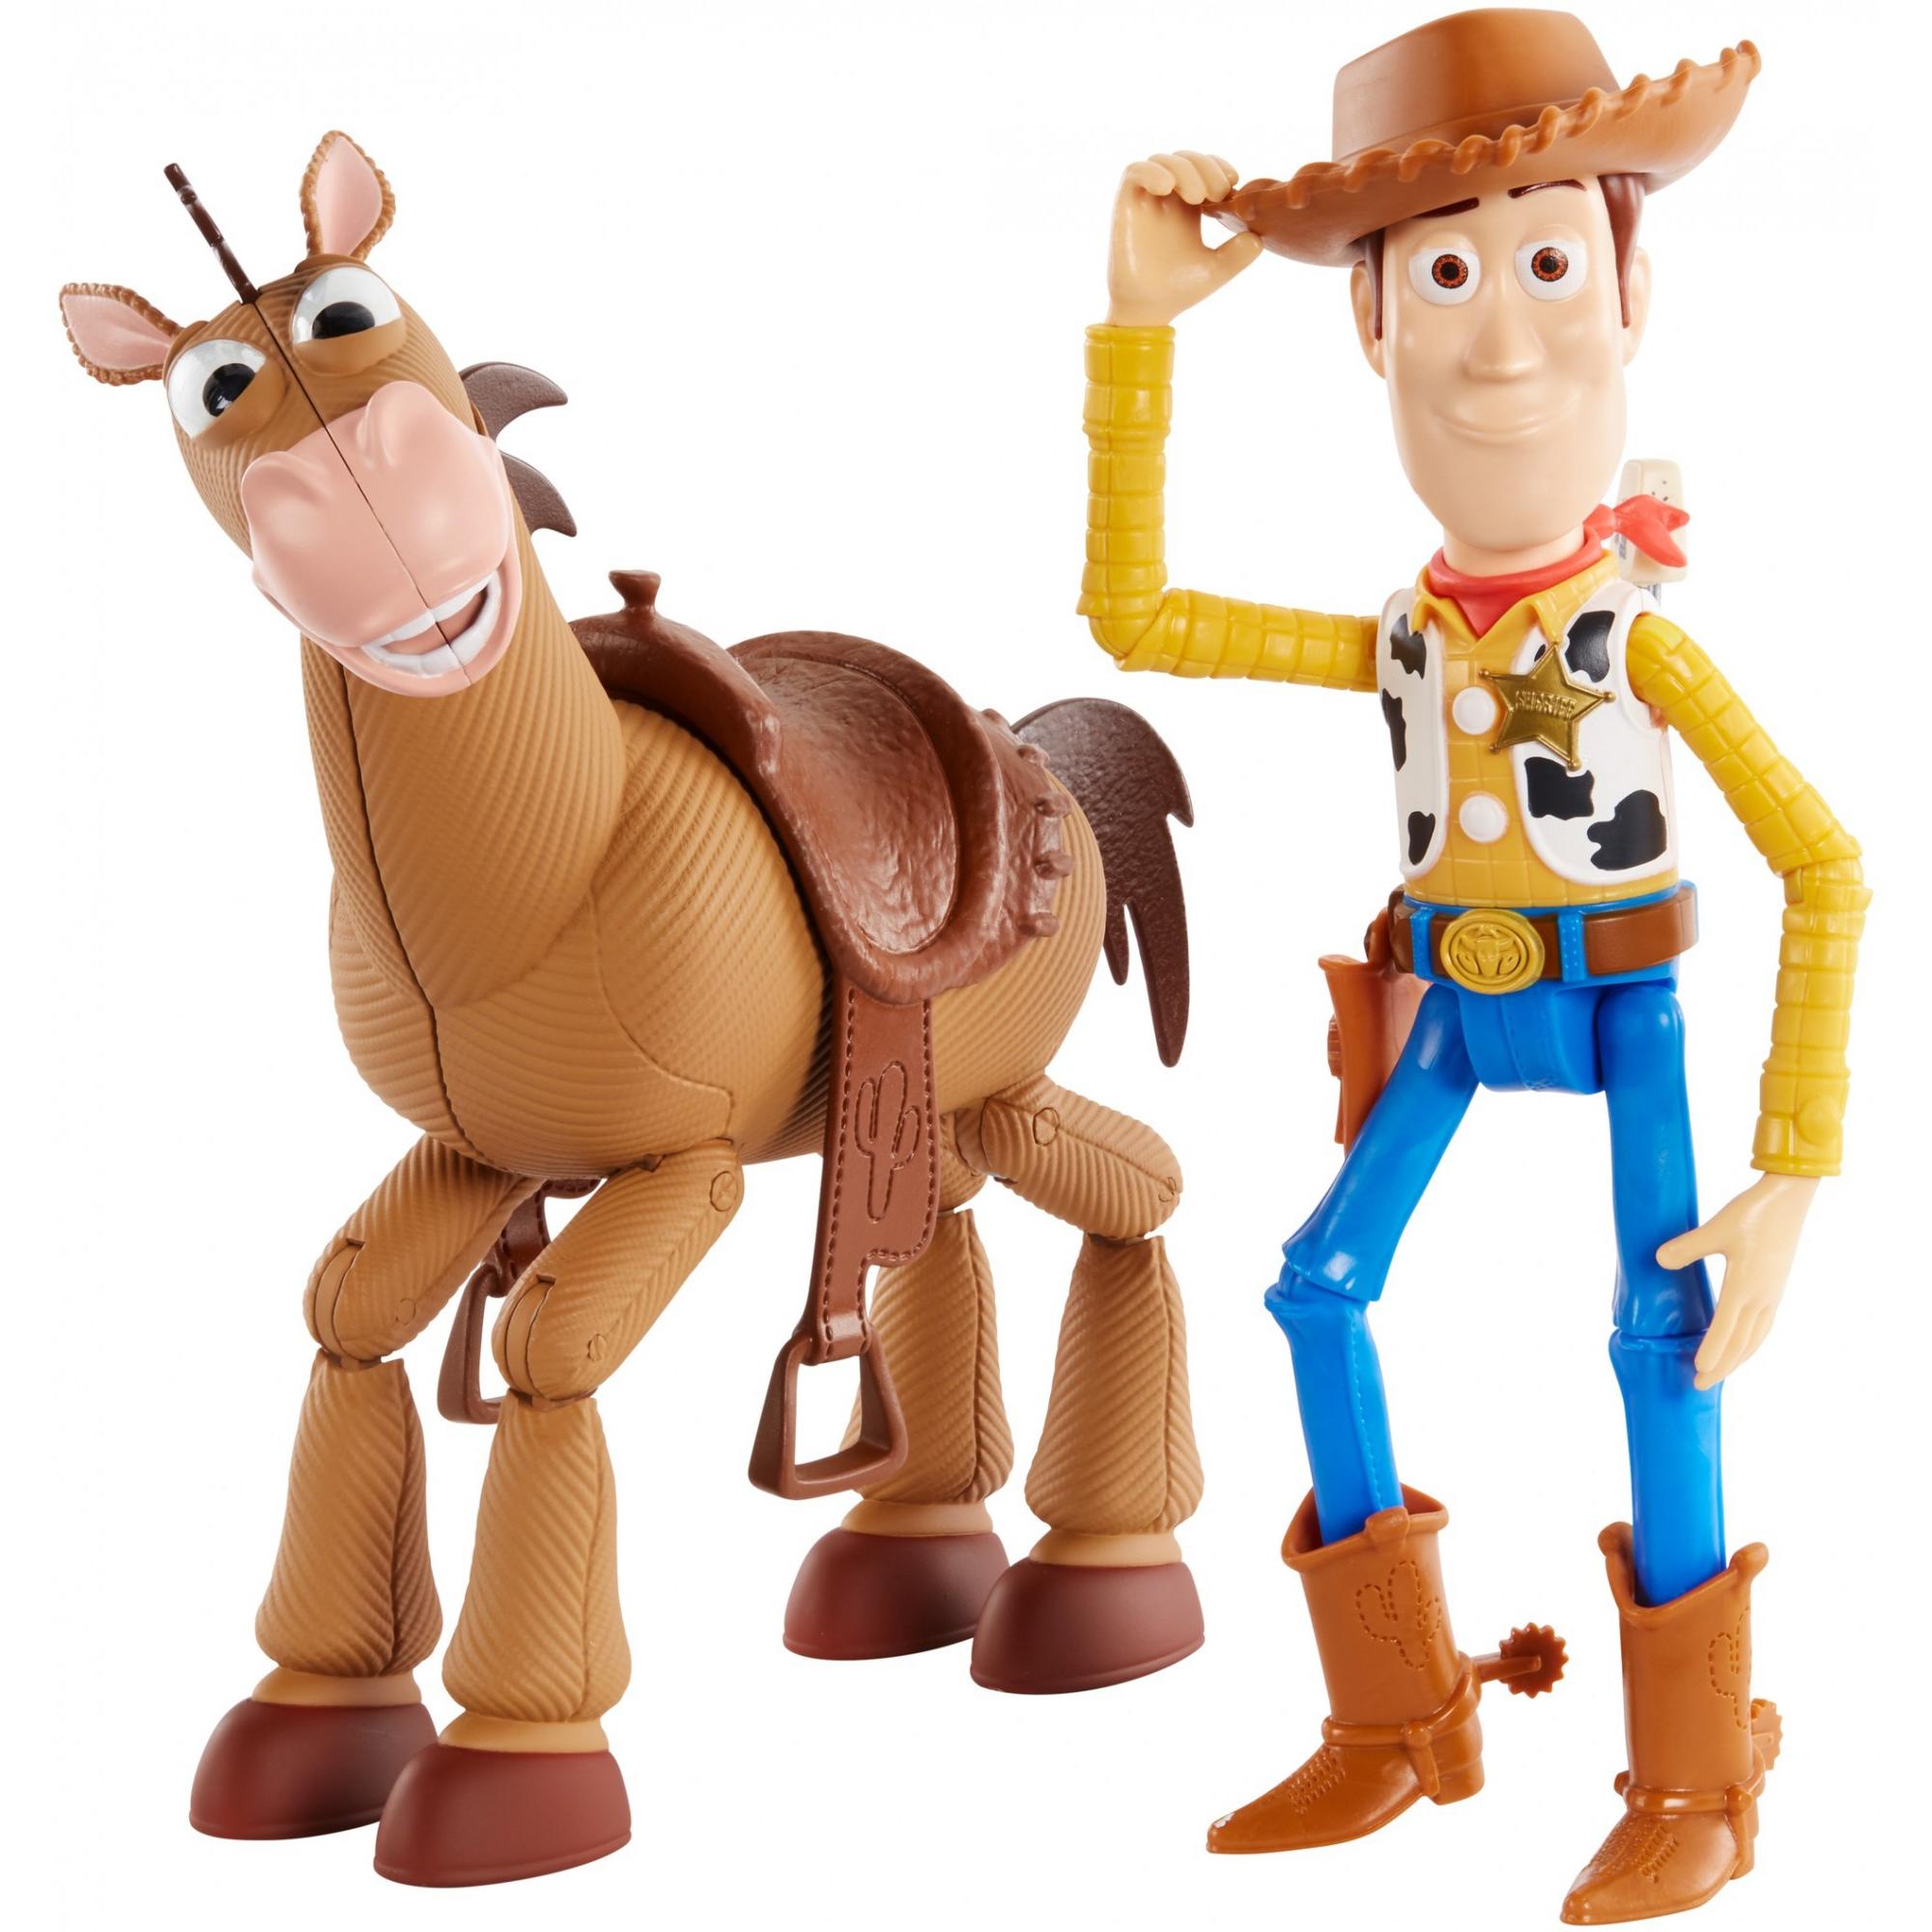 Award Winning Disney/Pixar Toy Story 4 Woody And Buzz Lightyear 2-Character Pack, Movie-Inspired Relative-Scale For Storytelling Play - image 1 of 8